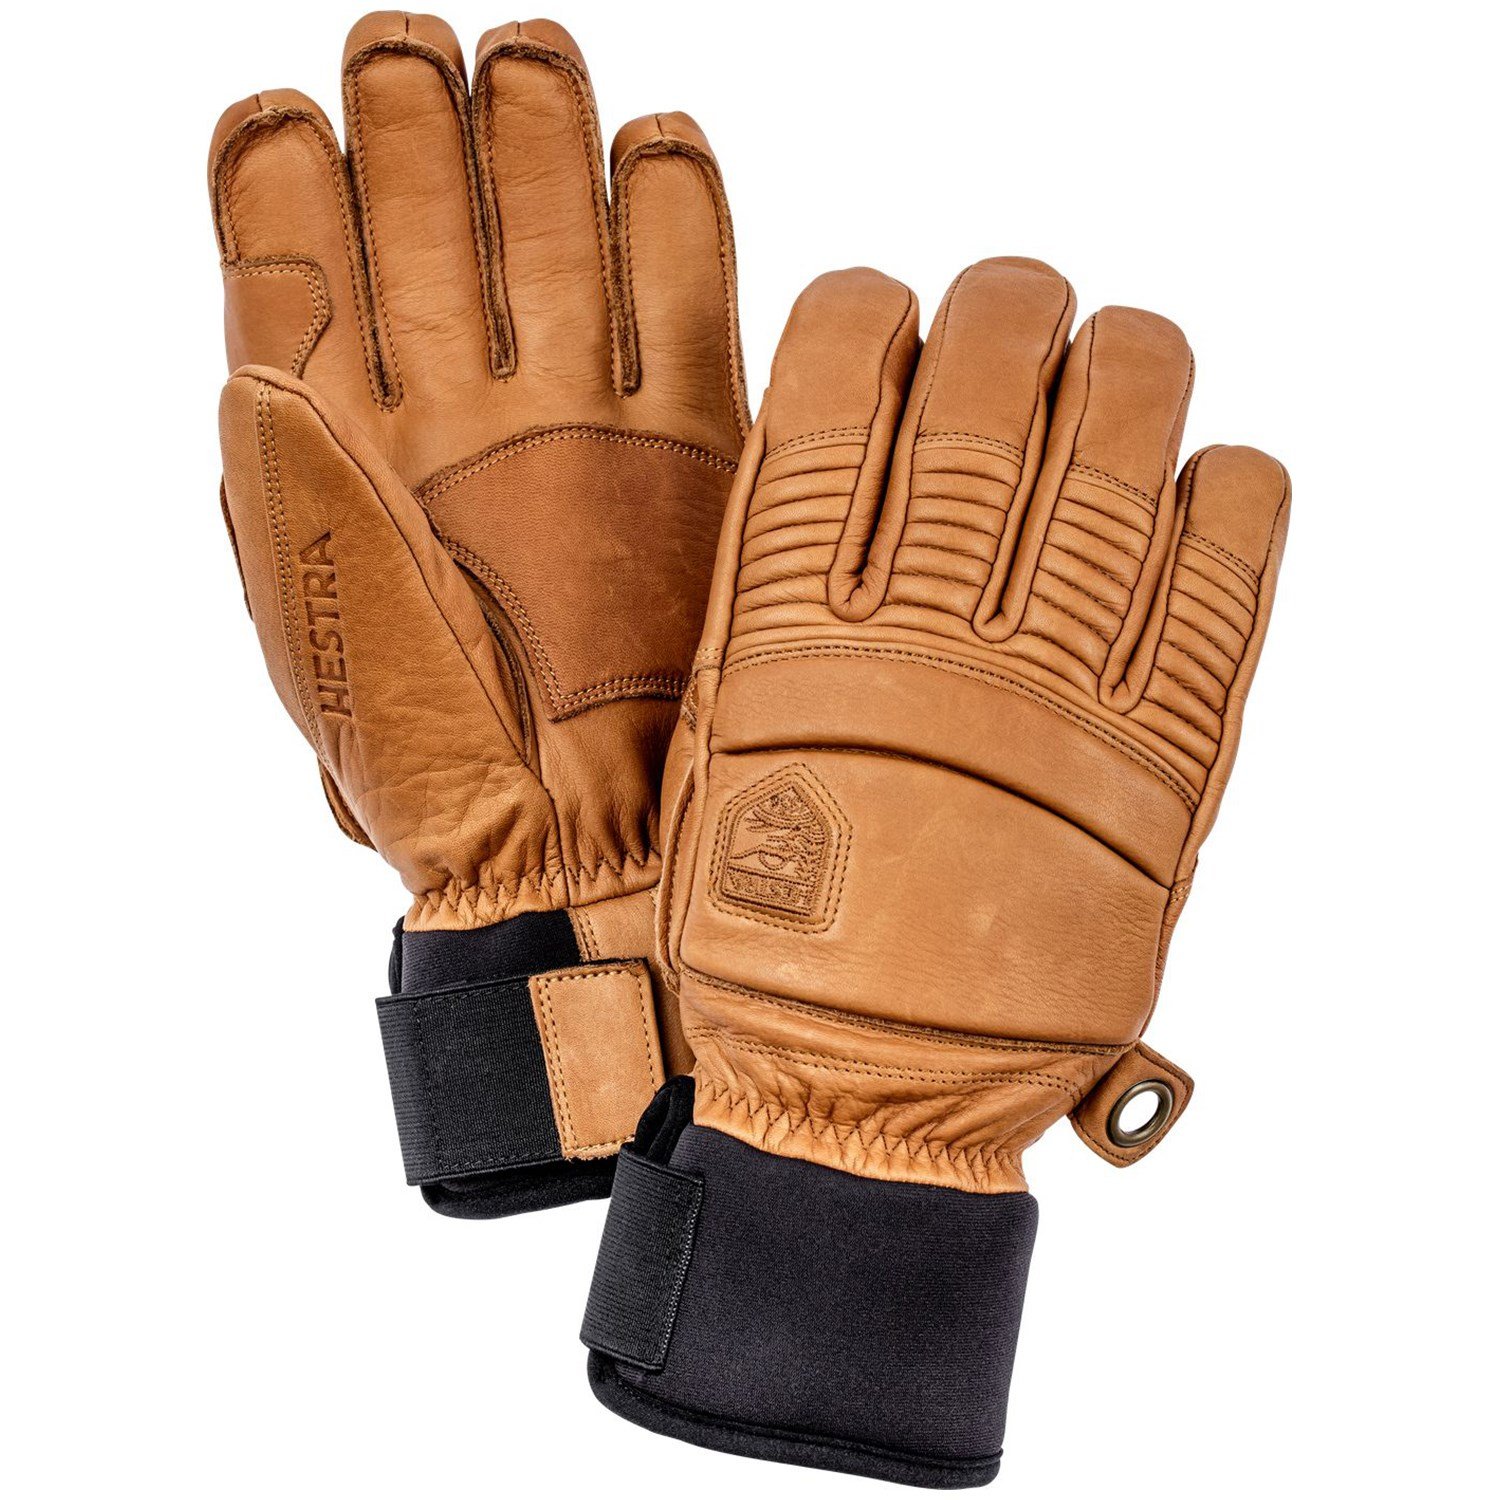 New Hestra Leather Lined Fall Line Mens Gloves 2020-21 Sz 8